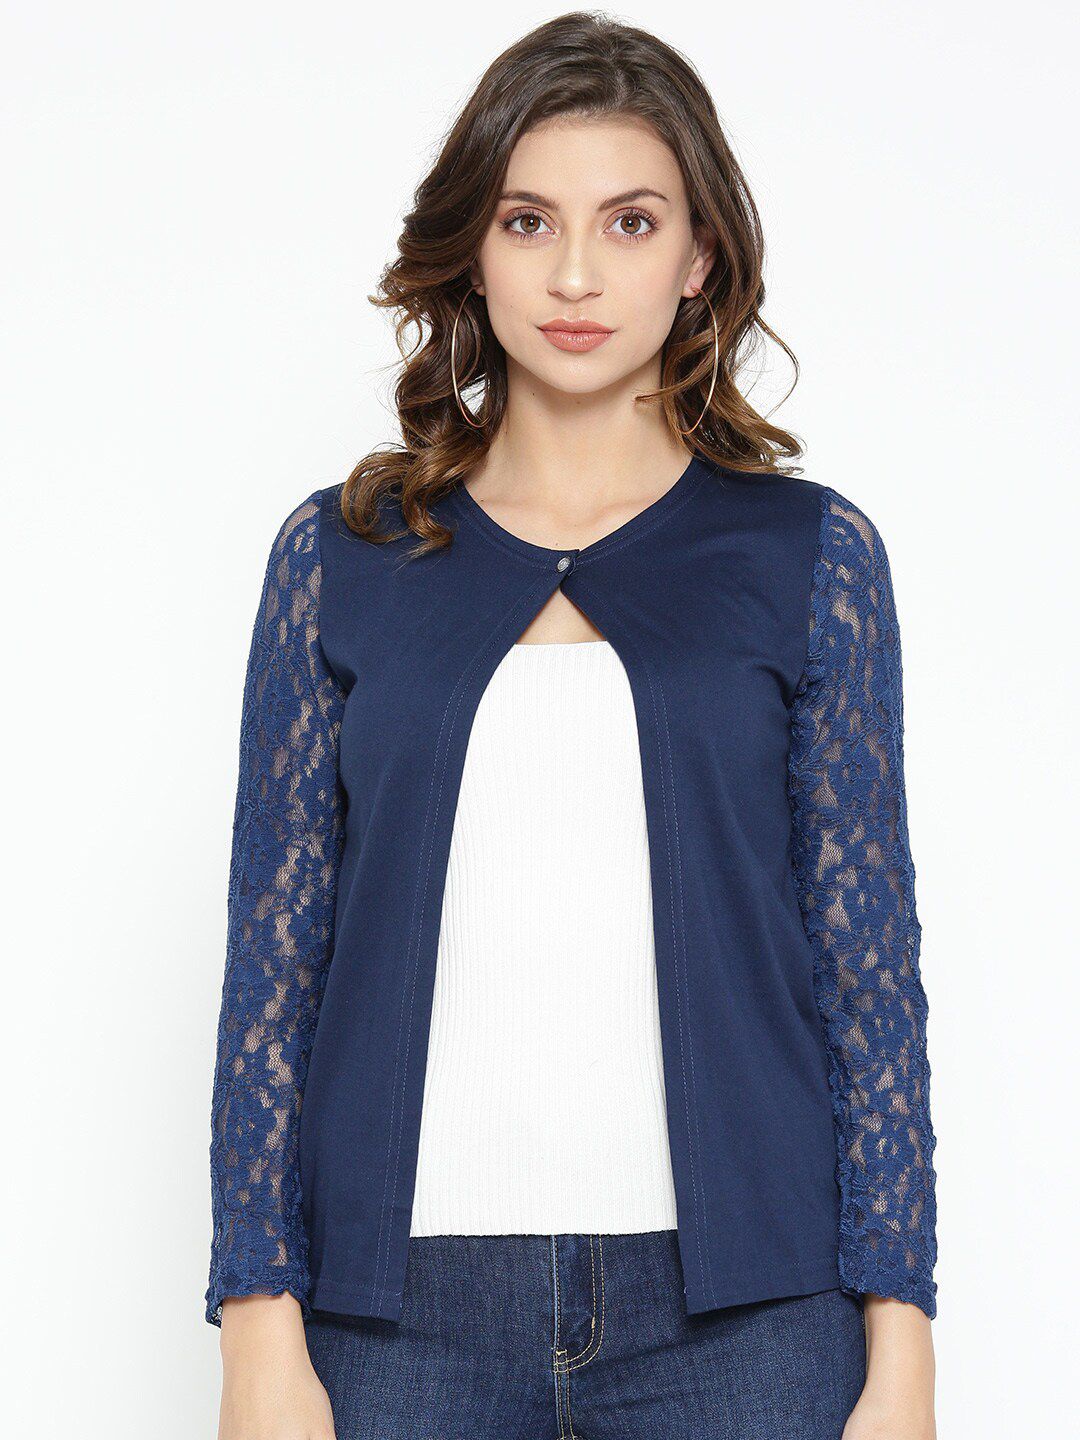 Skidlers Women Navy Blue Cotton Button Shrug Price in India